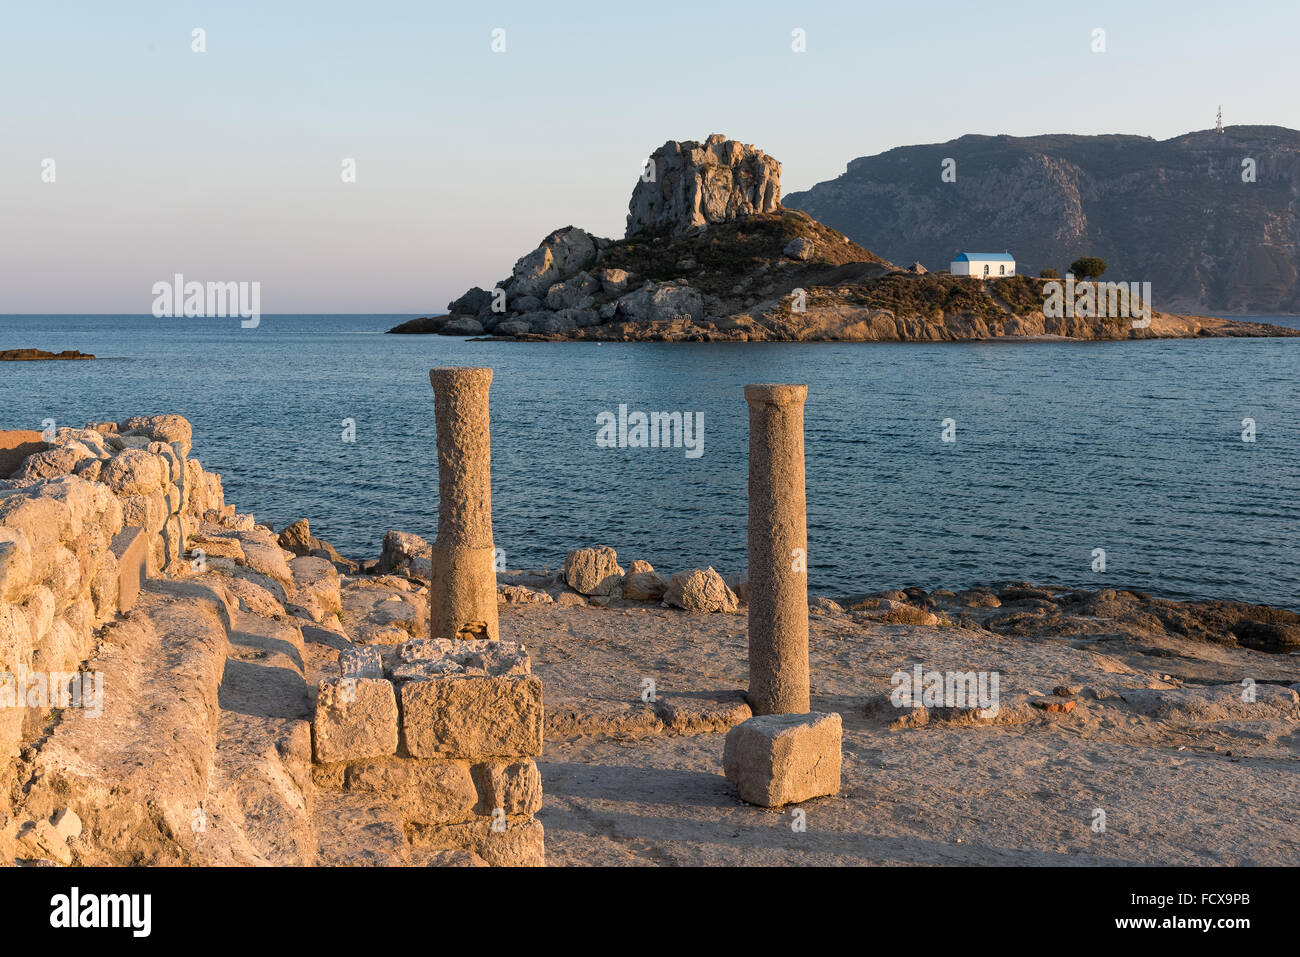 Landscape with archaeological site and islet at sunset in Kos island, Greece Stock Photo